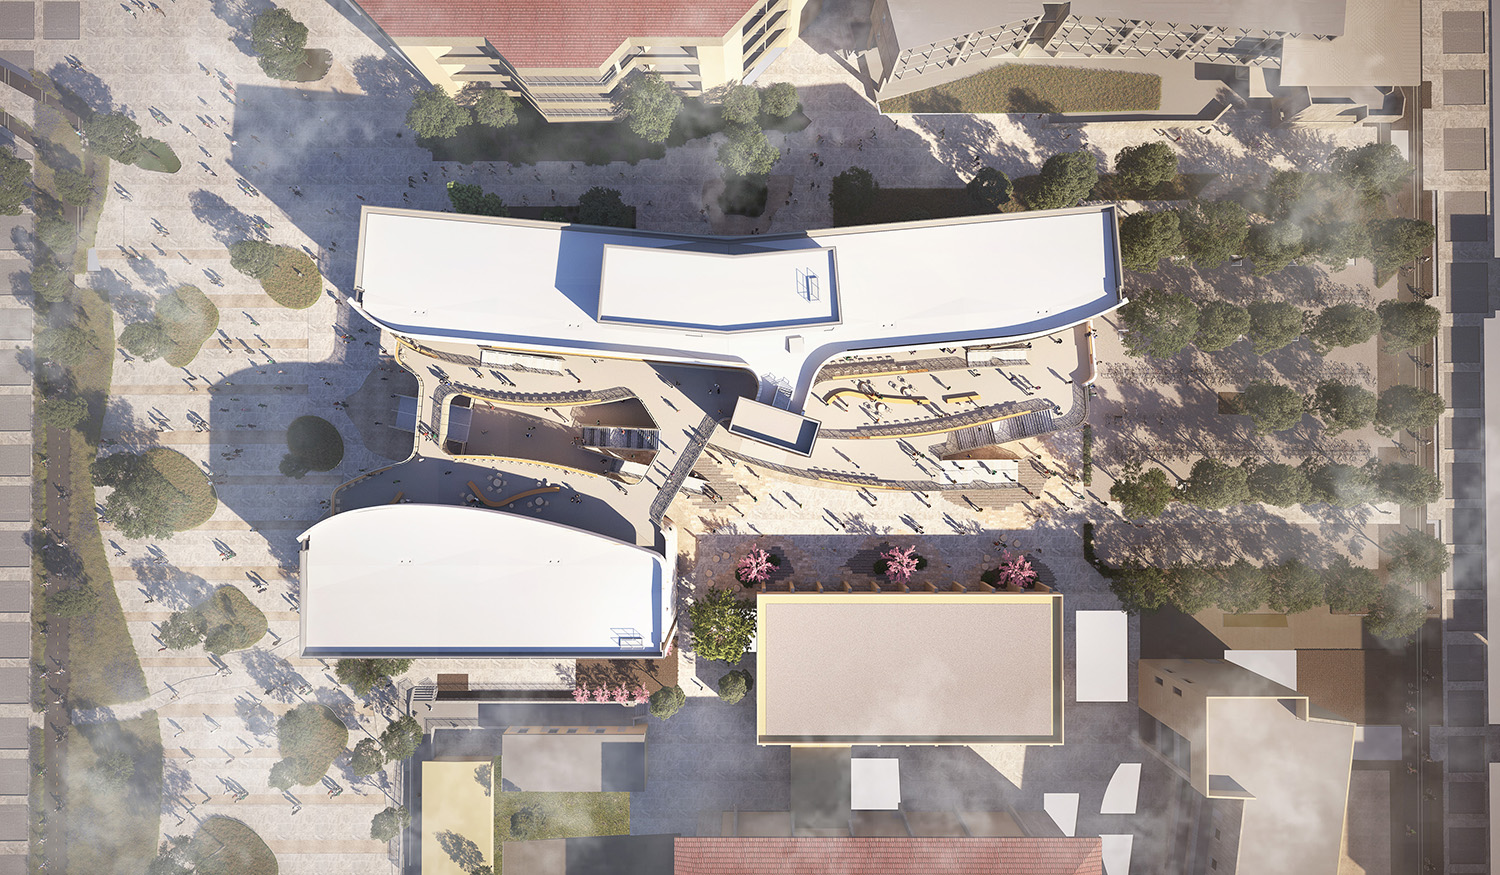 Aerial rendering of the new Classroom Building at the University of California Santa Barbara currently under construction. The project comprises two main volumes surrounding a central circulation corridor that runs east-west, linking the extension of Library Mall to Science Walk. This open-air paseo interconnects the functions of the building, providing outdoor terraces, stairs, bridges, and collaboration spaces designed to encourage serendipitous interactions and collaboration among students and faculty. Image: © LMN Architects.